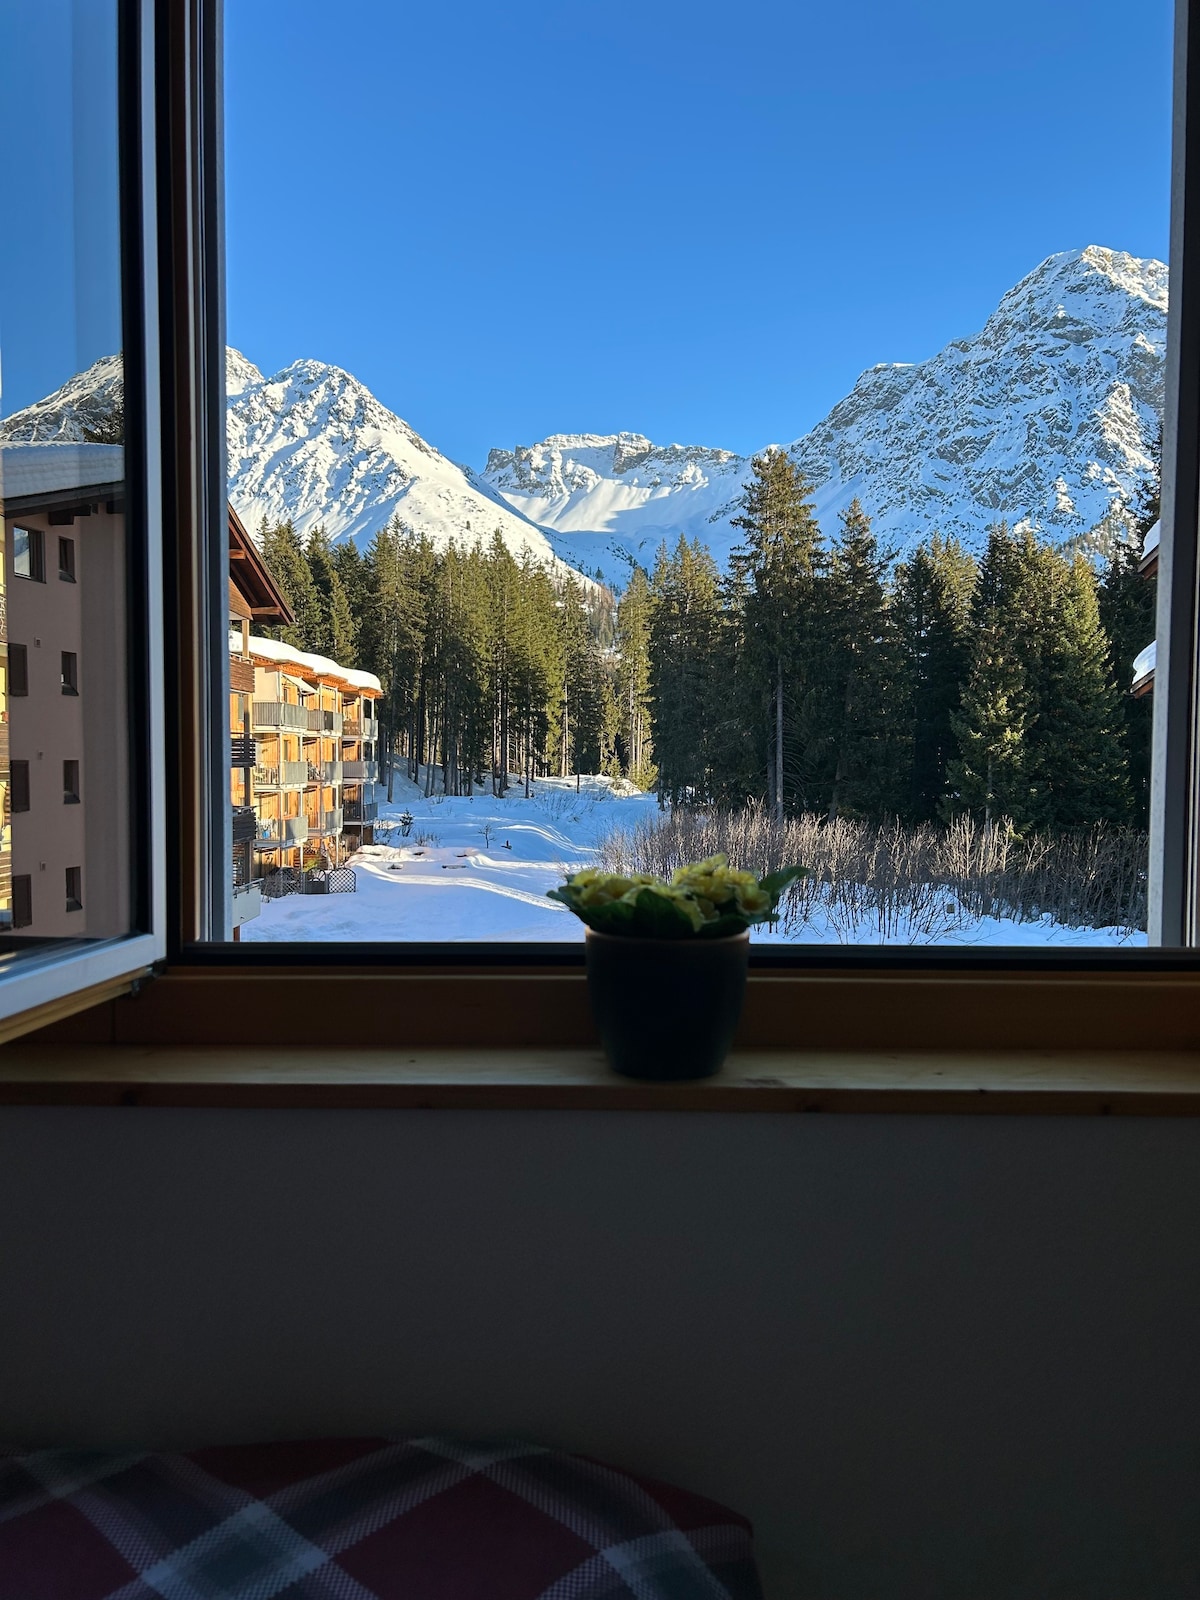 The Window to the Mountains